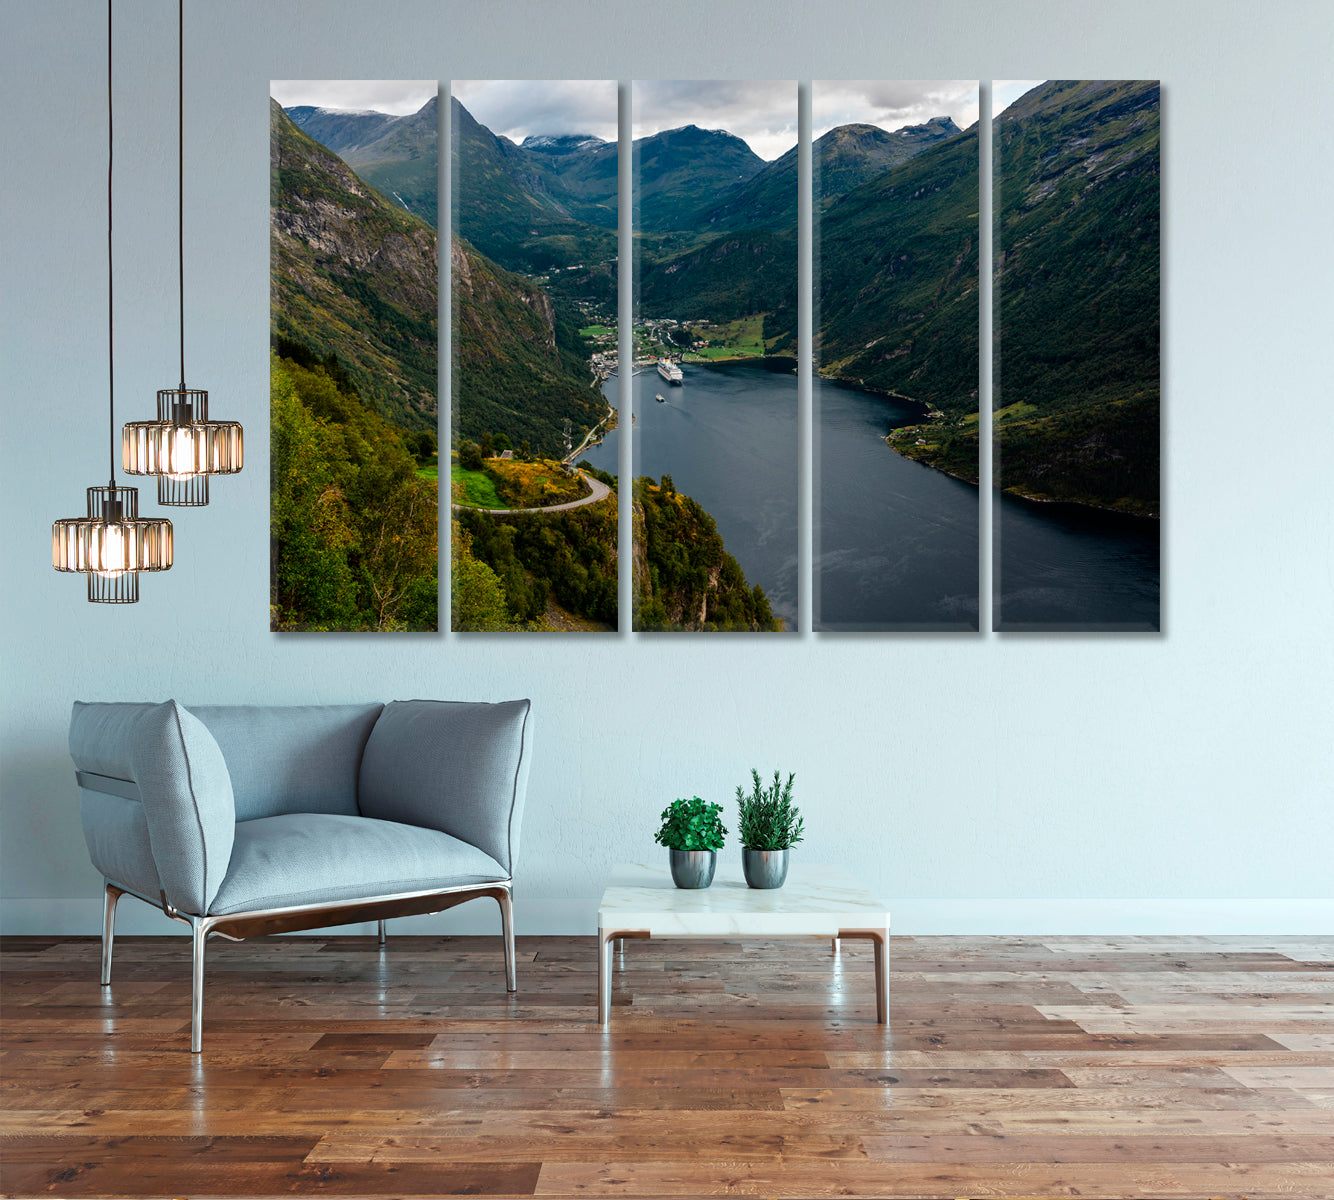 Cruise Liner In Geiranger Fjord Norway Canvas Print-Canvas Print-CetArt-5 Panels-36x24 inches-CetArt